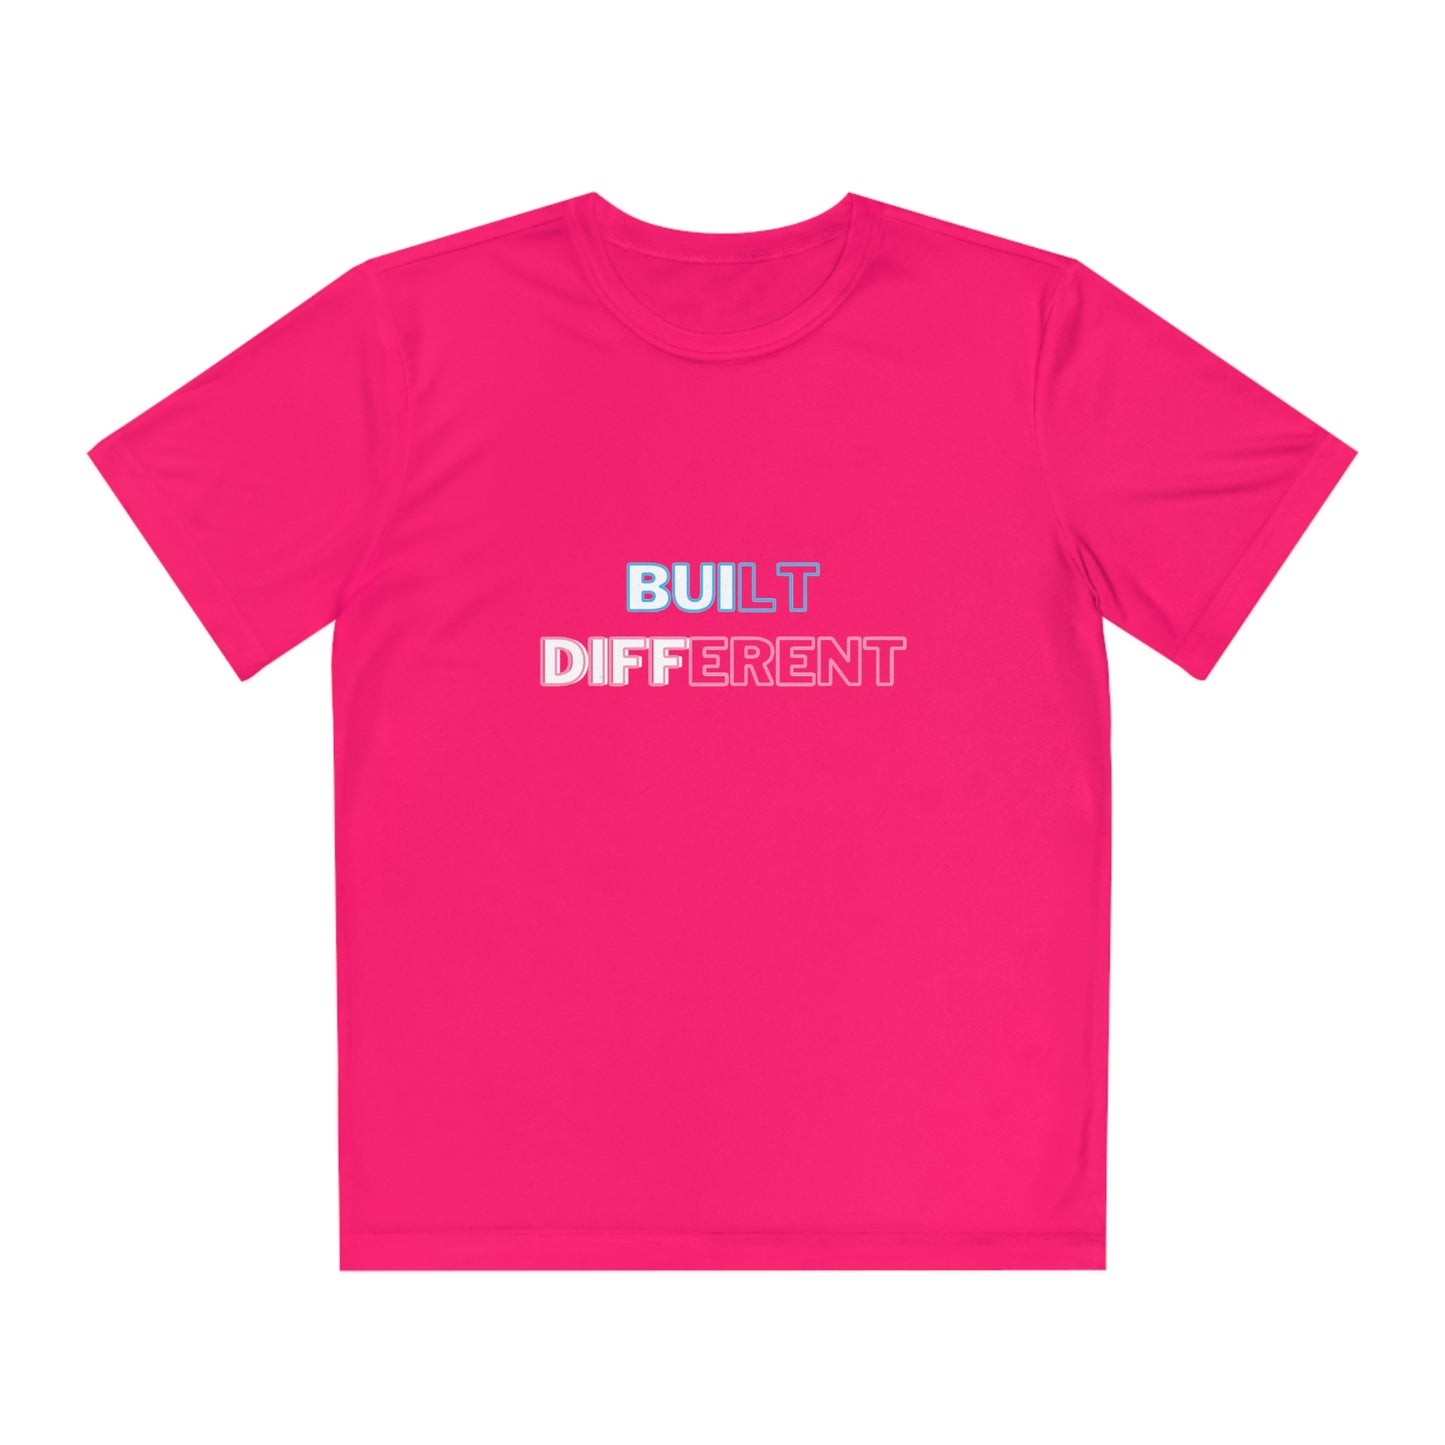 Built Different, inspired by Jase & Pierce - Youth Competitor Tee